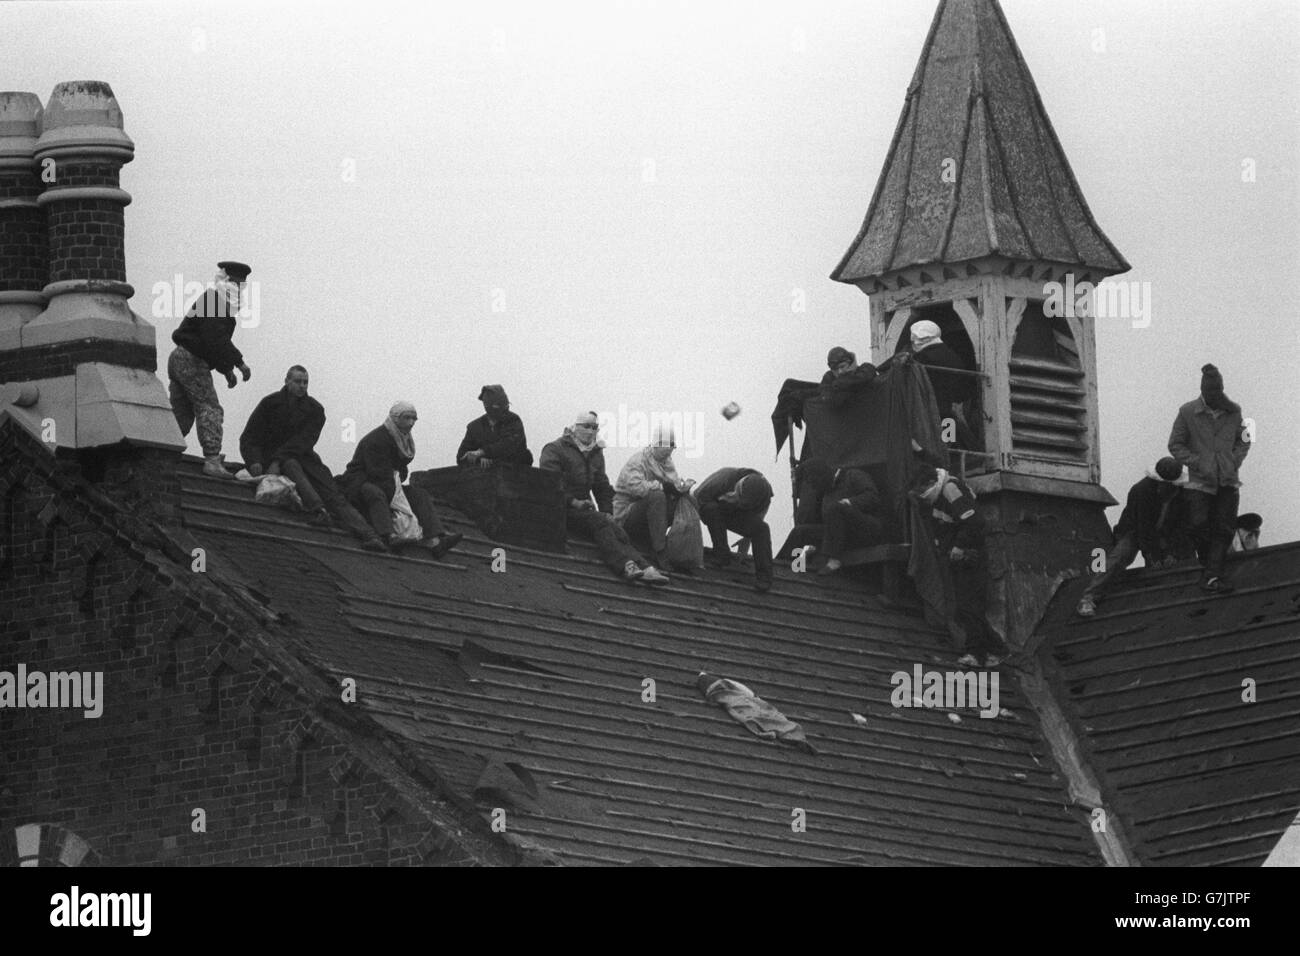 Prisoners continue their rooftop protest, with one of the prisoner's (l) throwing bricks into the Strangeways prison yard. Stock Photo